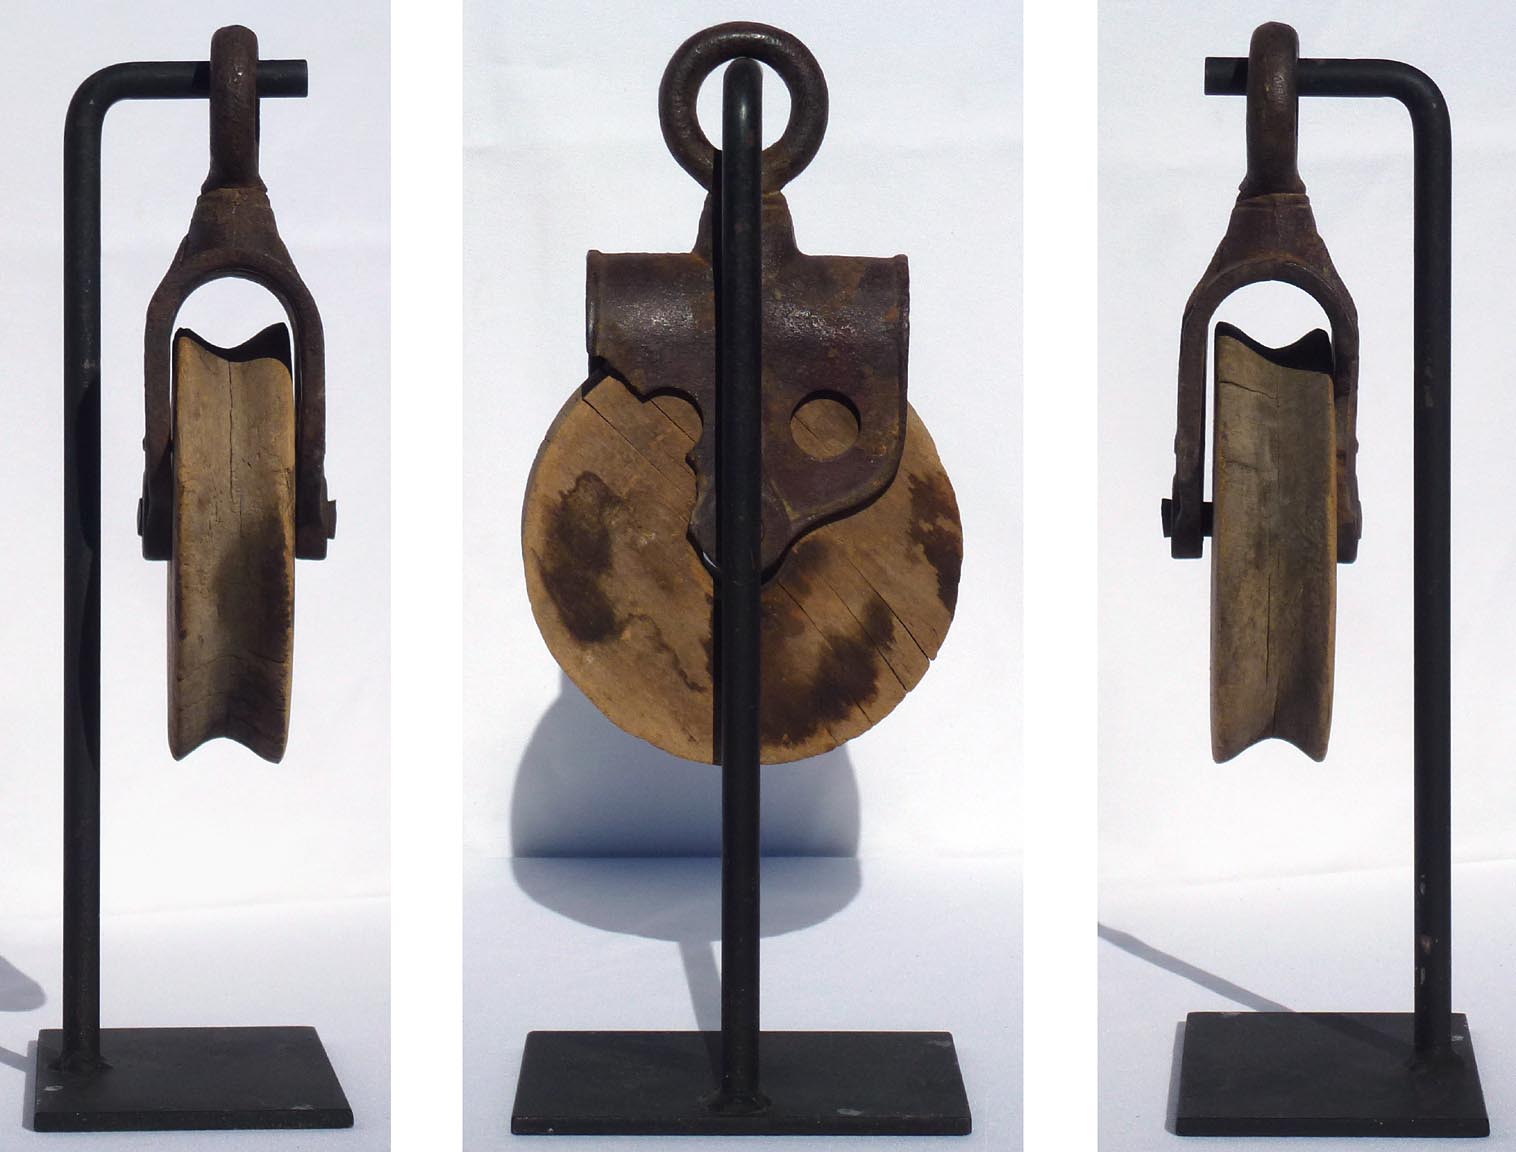 Wood and metal pulley